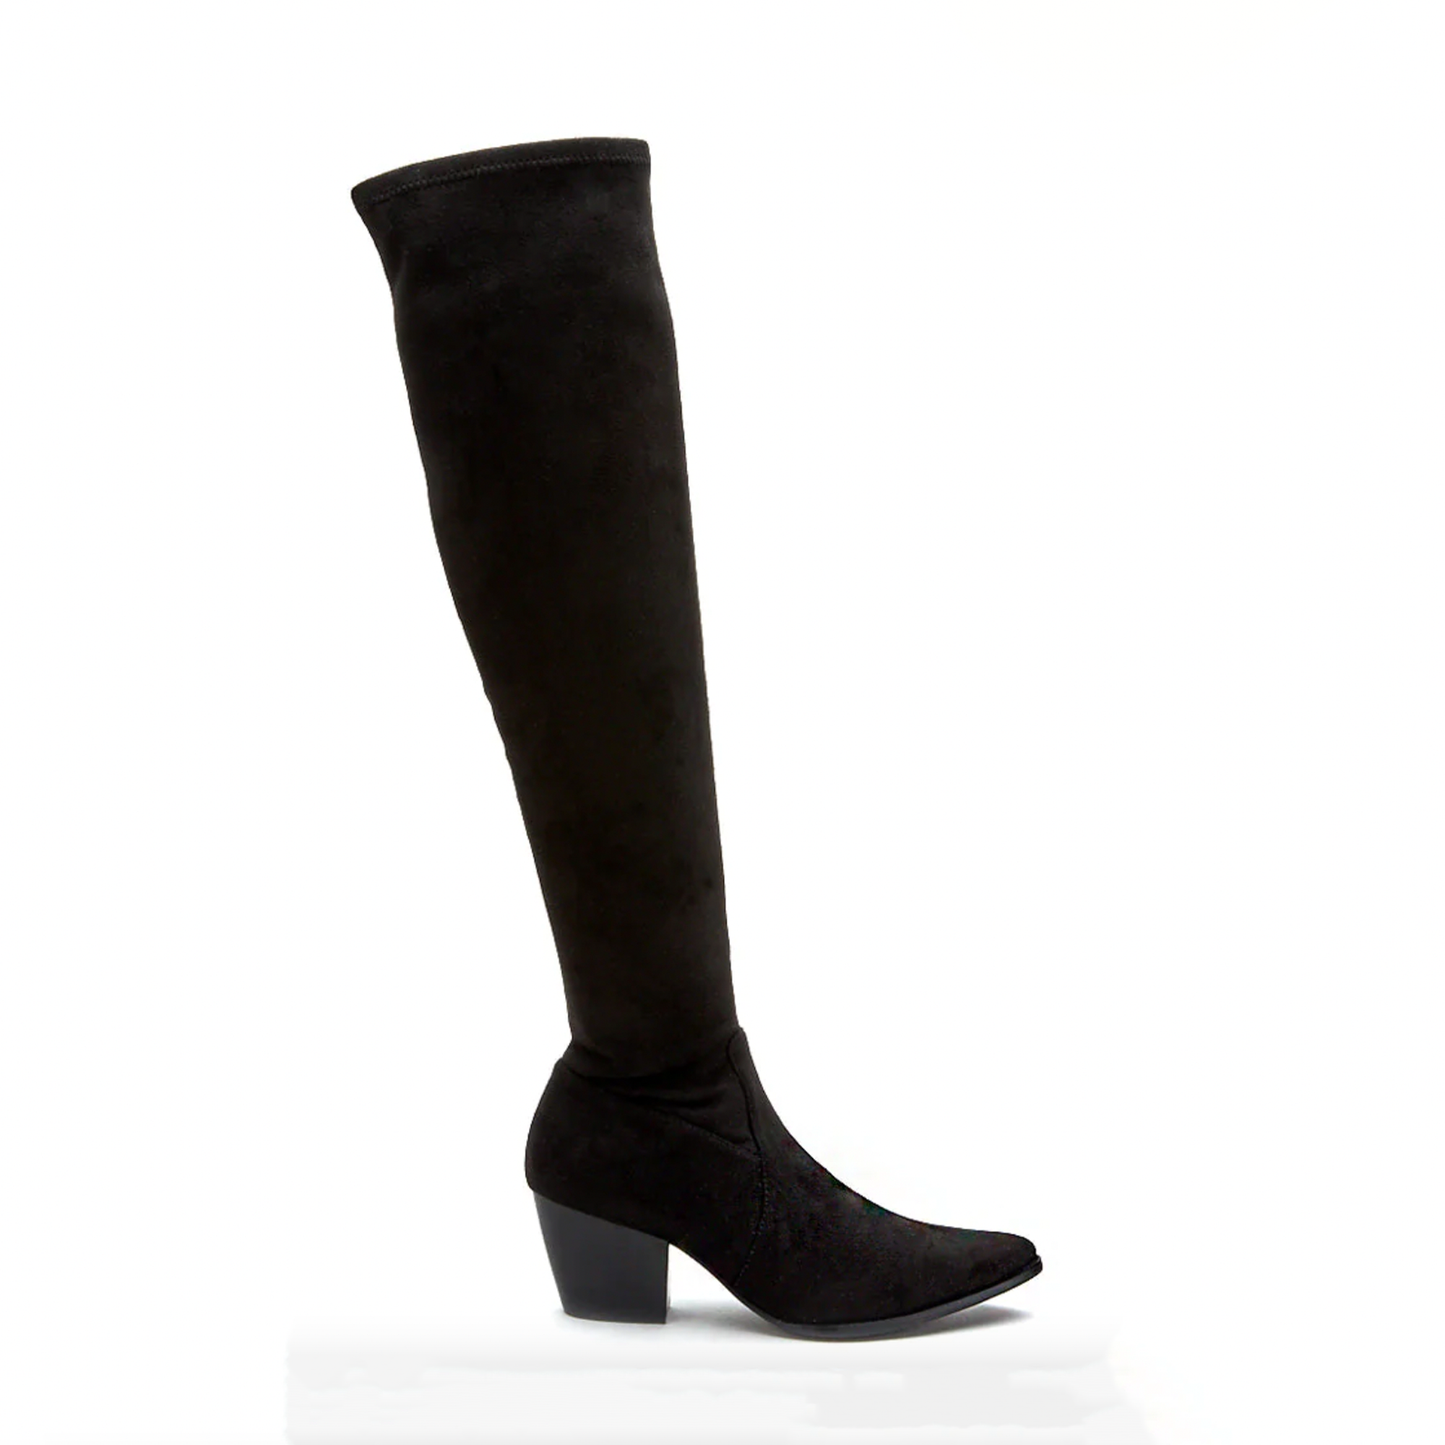 Broadway Over The Knee Boot. Make a fashion statement with the Broadway boot. This sock boot has easy pull on with its inside zipper closure and offers excellent underfoot comfort, thanks to the lightly cushioned footbed. The stacked block heel adds to the tailored appeal